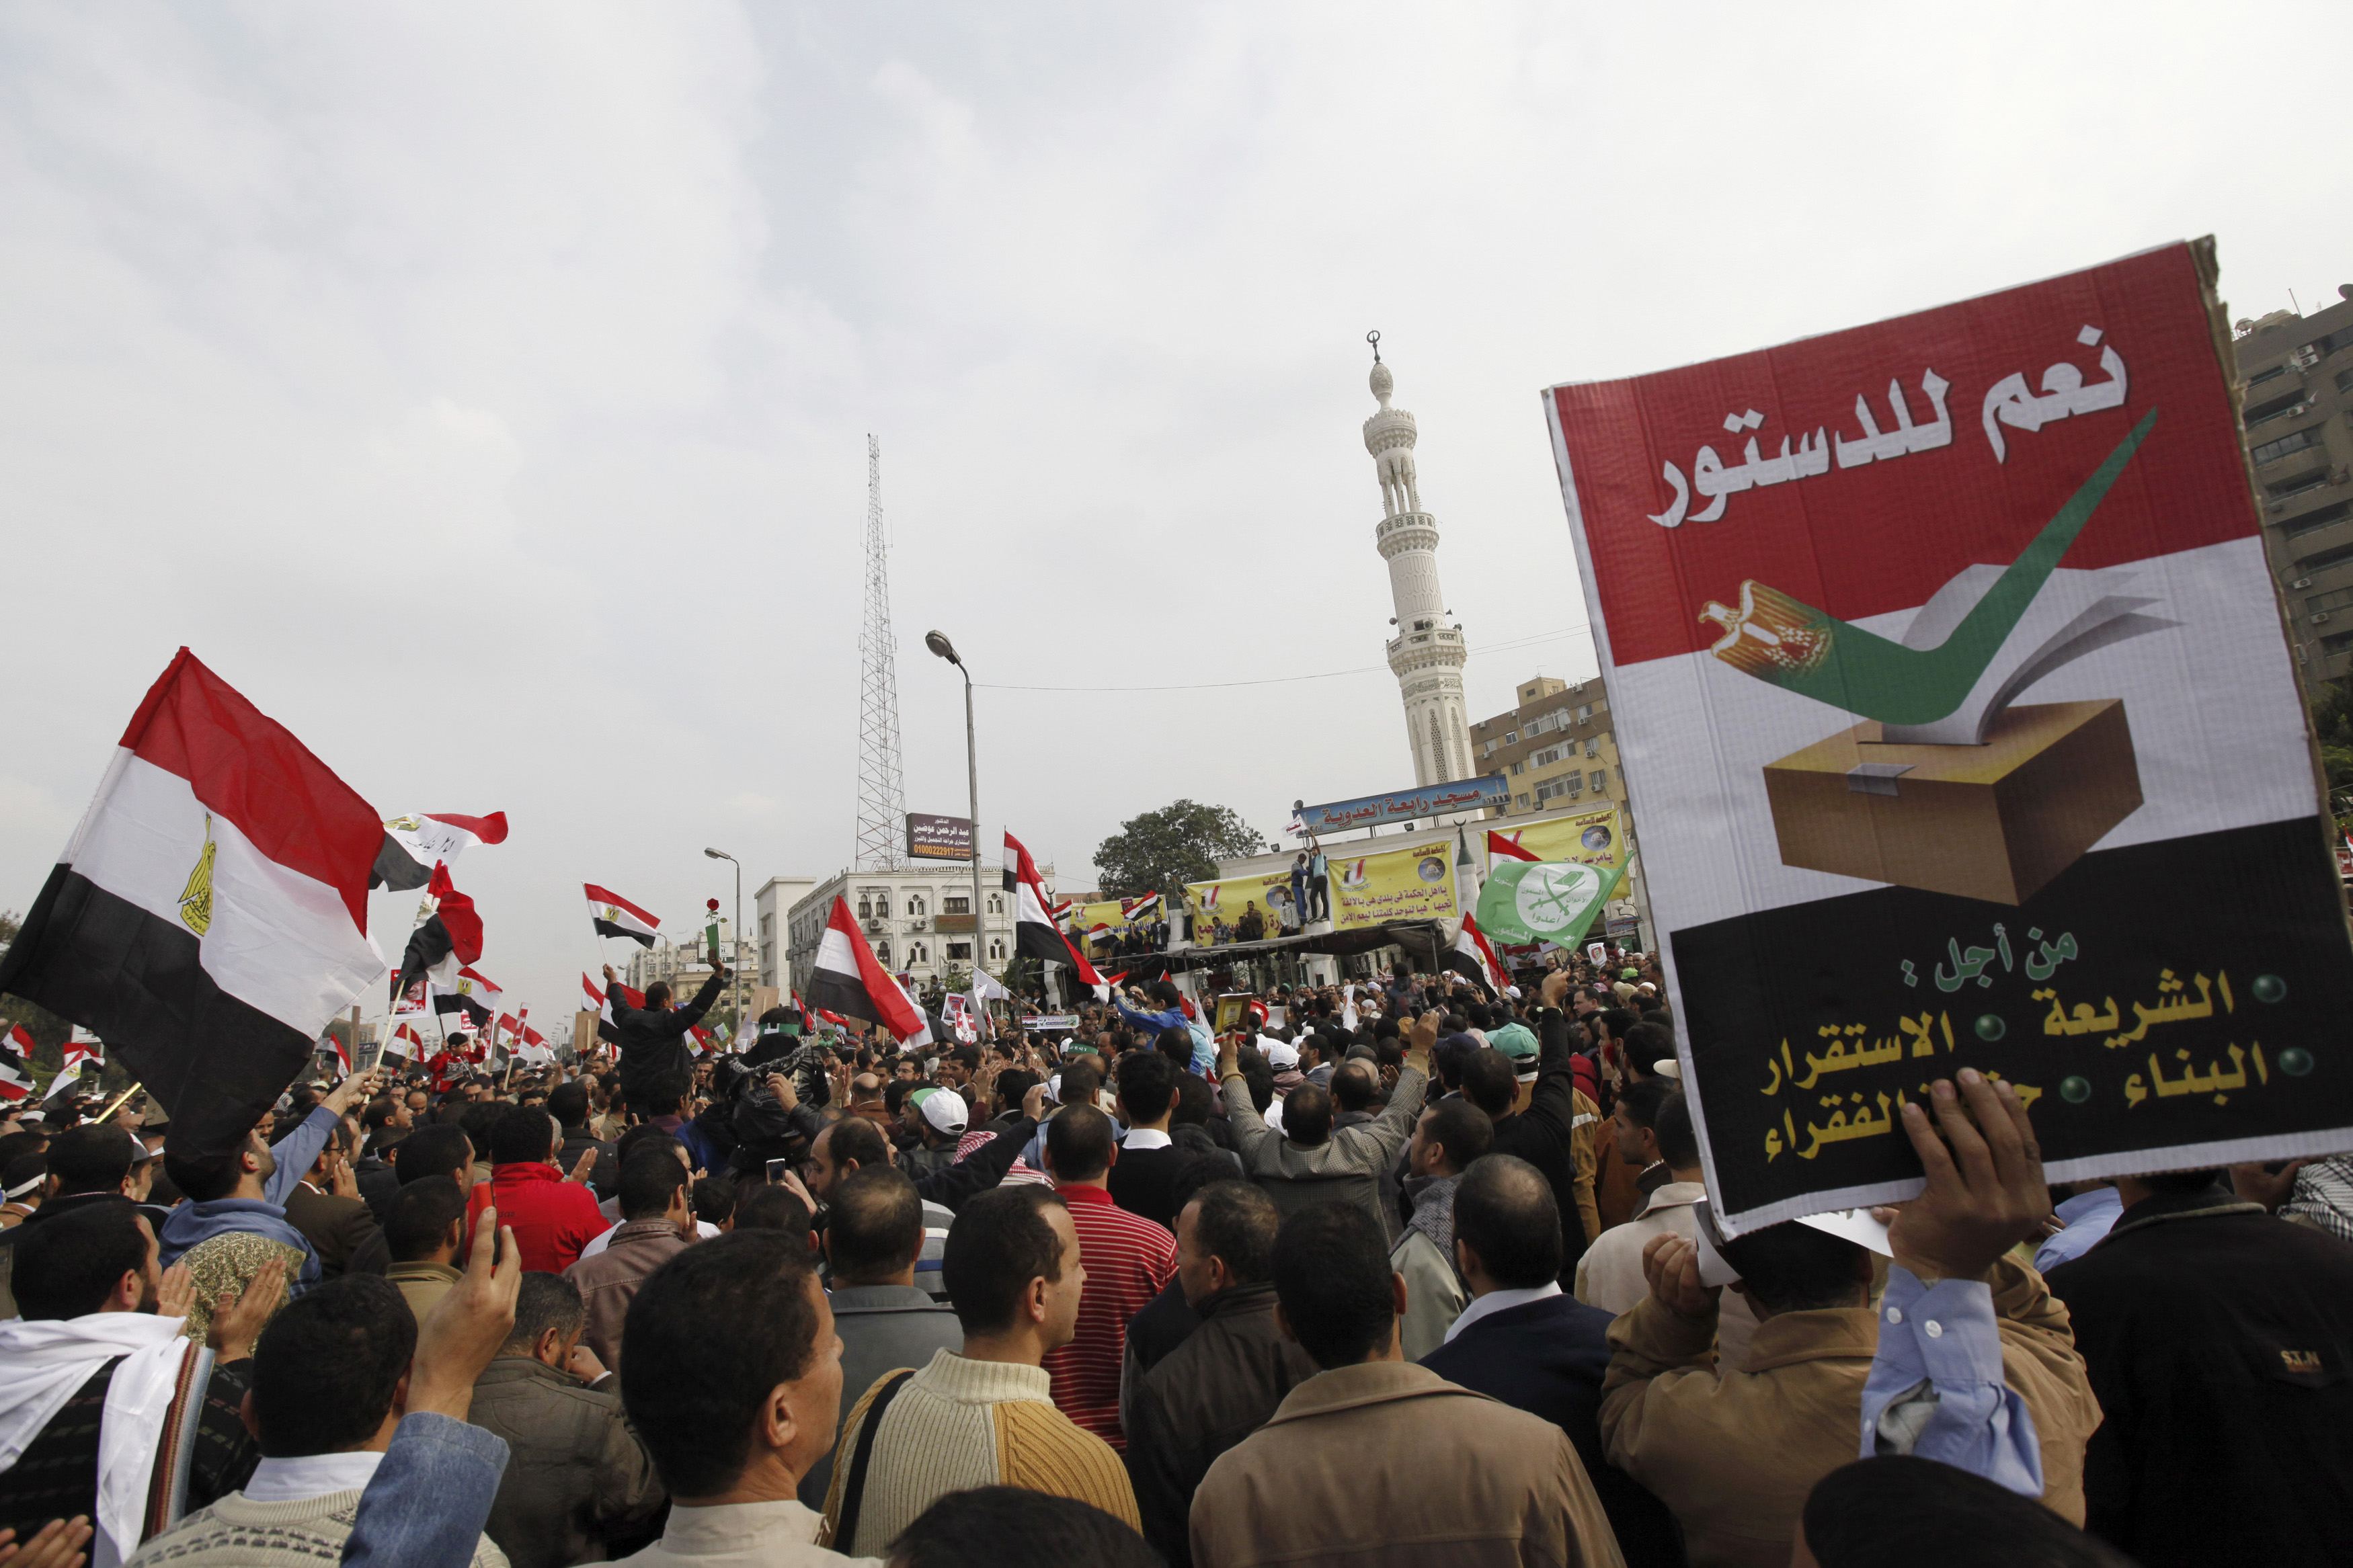 Opposition to presidency opens rifts in Egypt's Islamist current